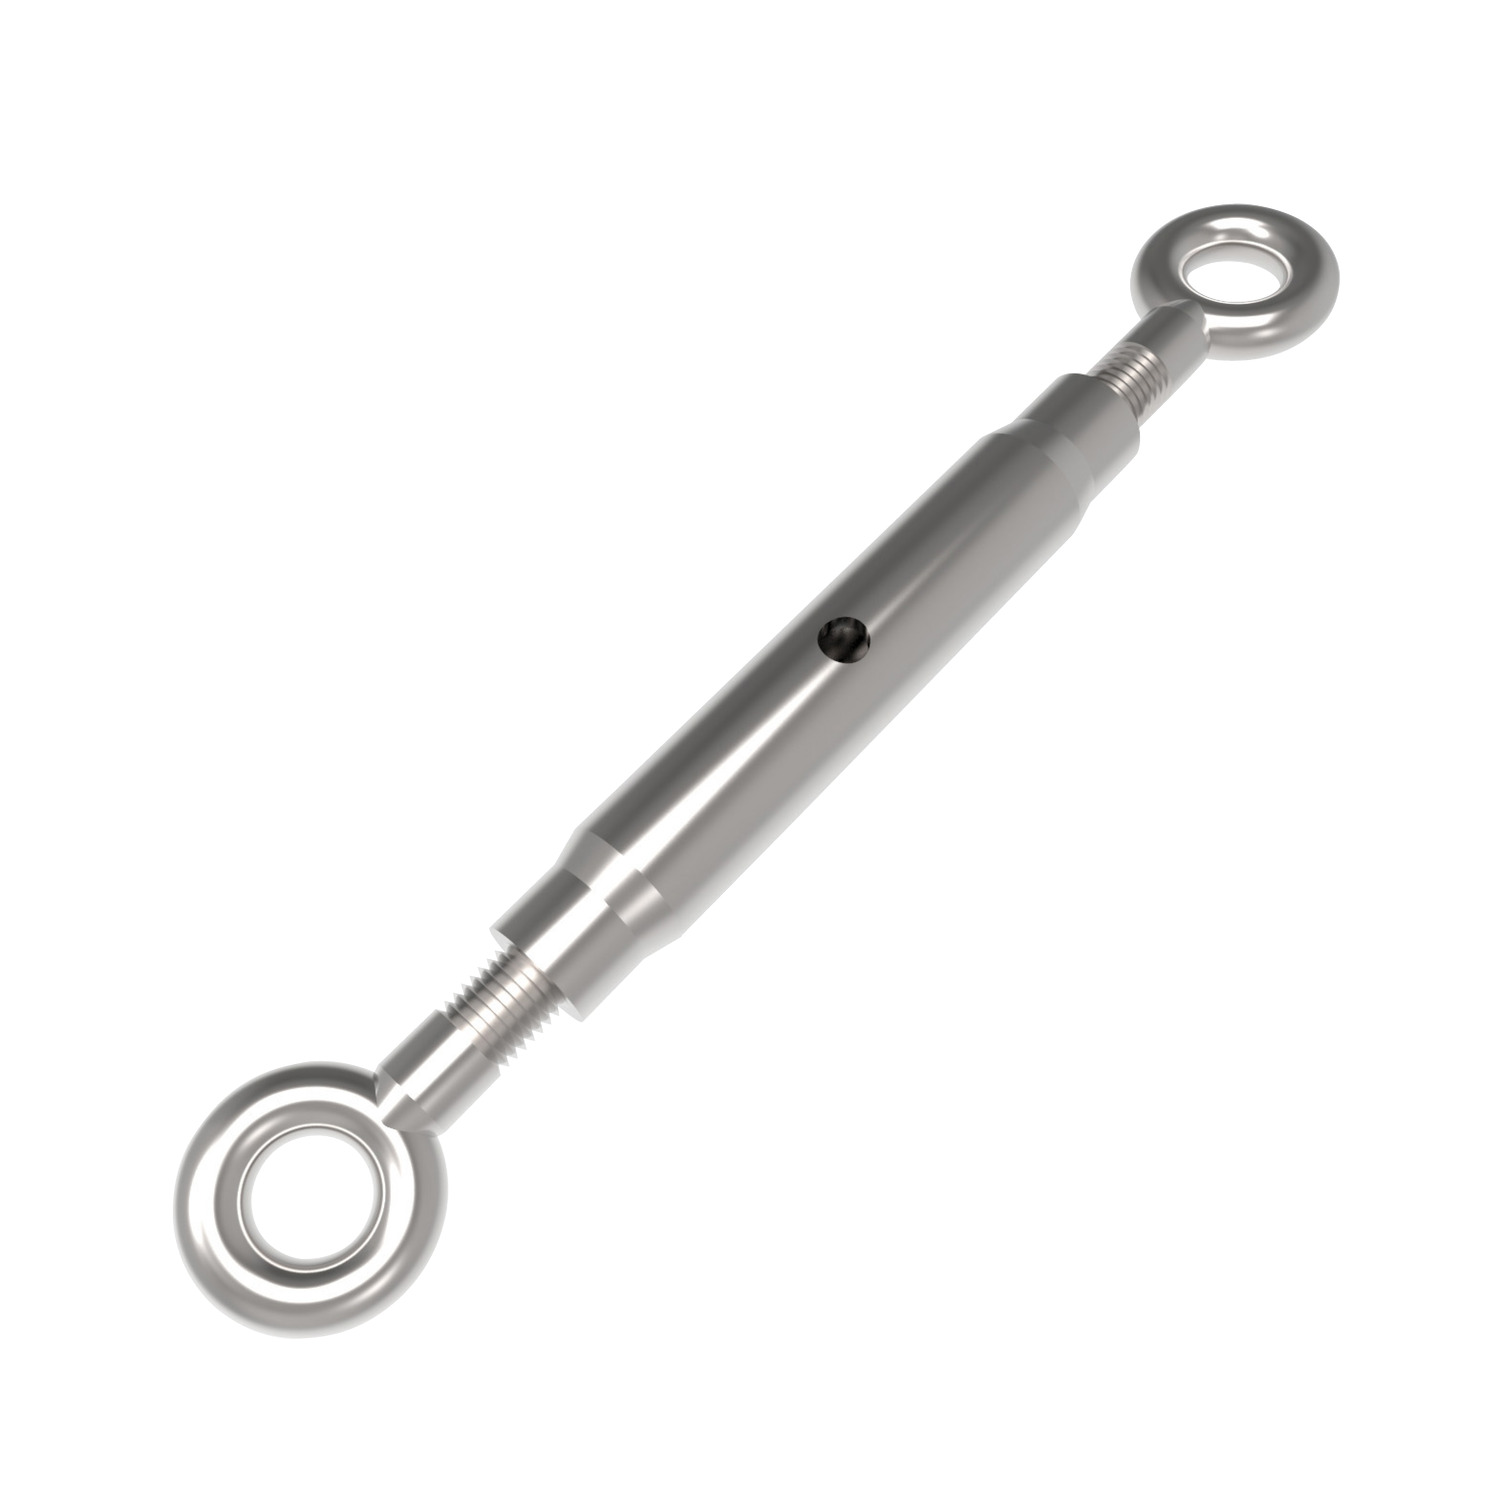 R3808.006-ZP Eye End Pipe Body Turnbuckles  M6 steel Not to be used for lifting unless SWL marked.